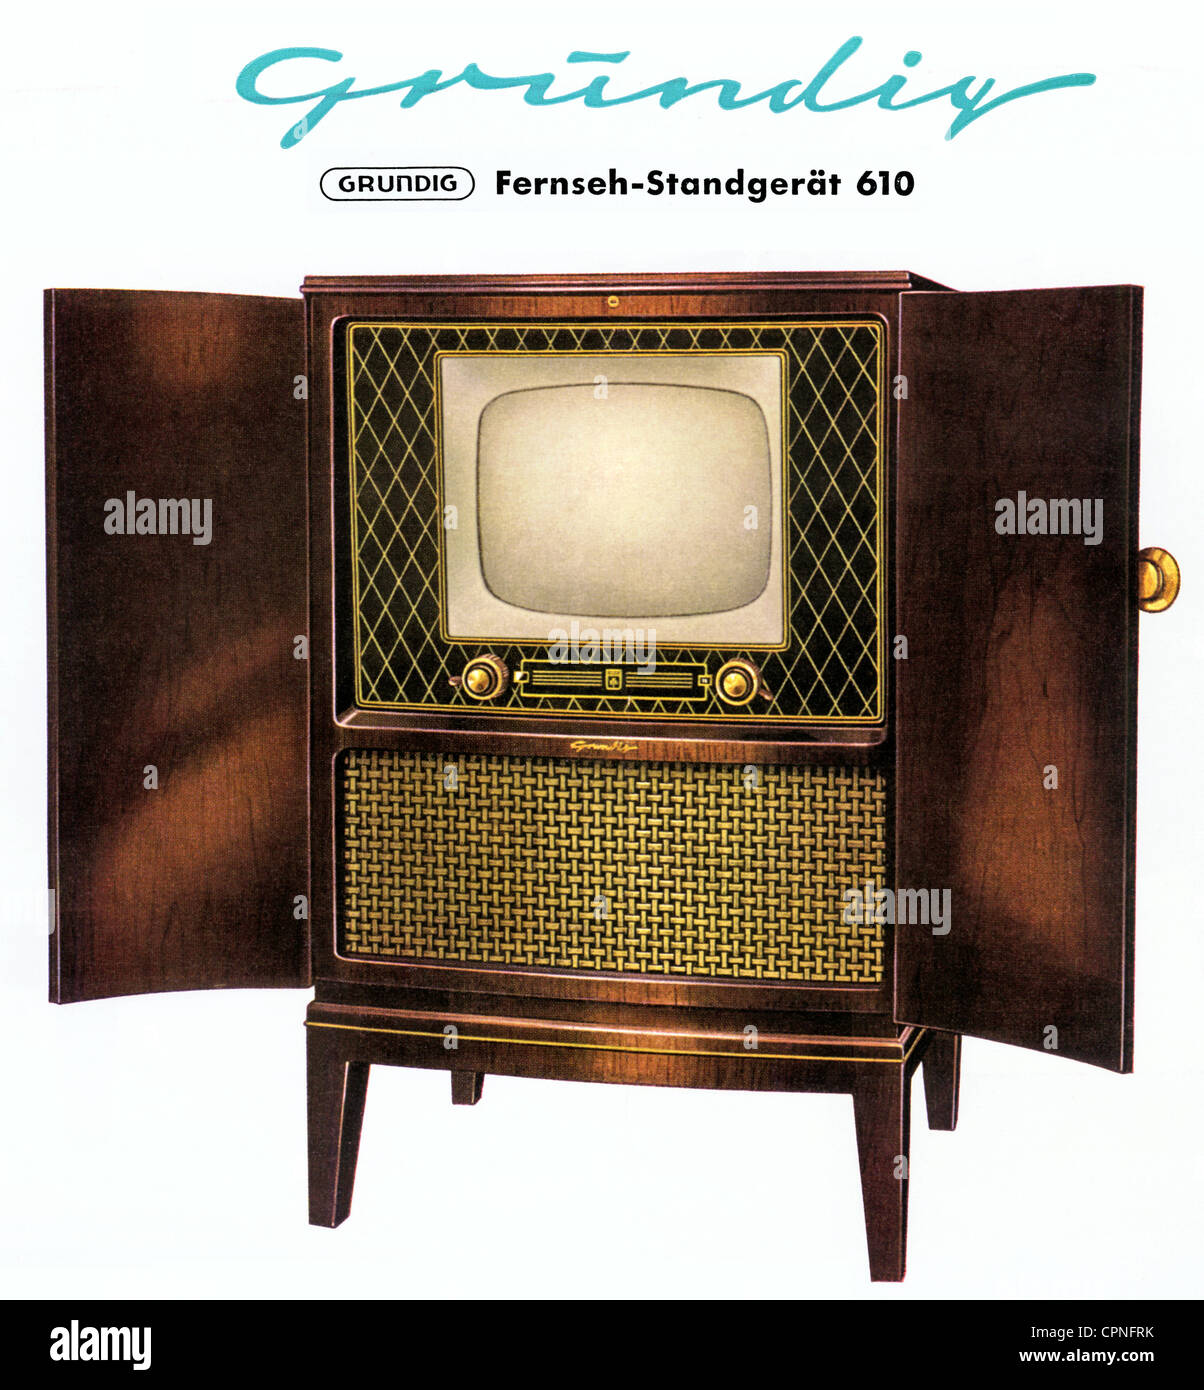 broadcast,television,television set,first Grundig television console,standalone TV device 610,former retail price: DM 1680,chassis: exotic woods,screen diagonal: 42 centimeter,cabinet with closeable doors,Germany,1953,advertising,promotional leaflet,advertising handout,TV history,economic miracle,economic miracles,Made in Germany,clipping,cut out,cut-out,cut-outs,50s,1950s,television furniture,piece of furniture,pieces of furniture,closeable,wooden chassis,wooden case,television set,TV,television sets,TV sets,TVs,TV set,tube ,Additional-Rights-Clearences-Not Available Stock Photo